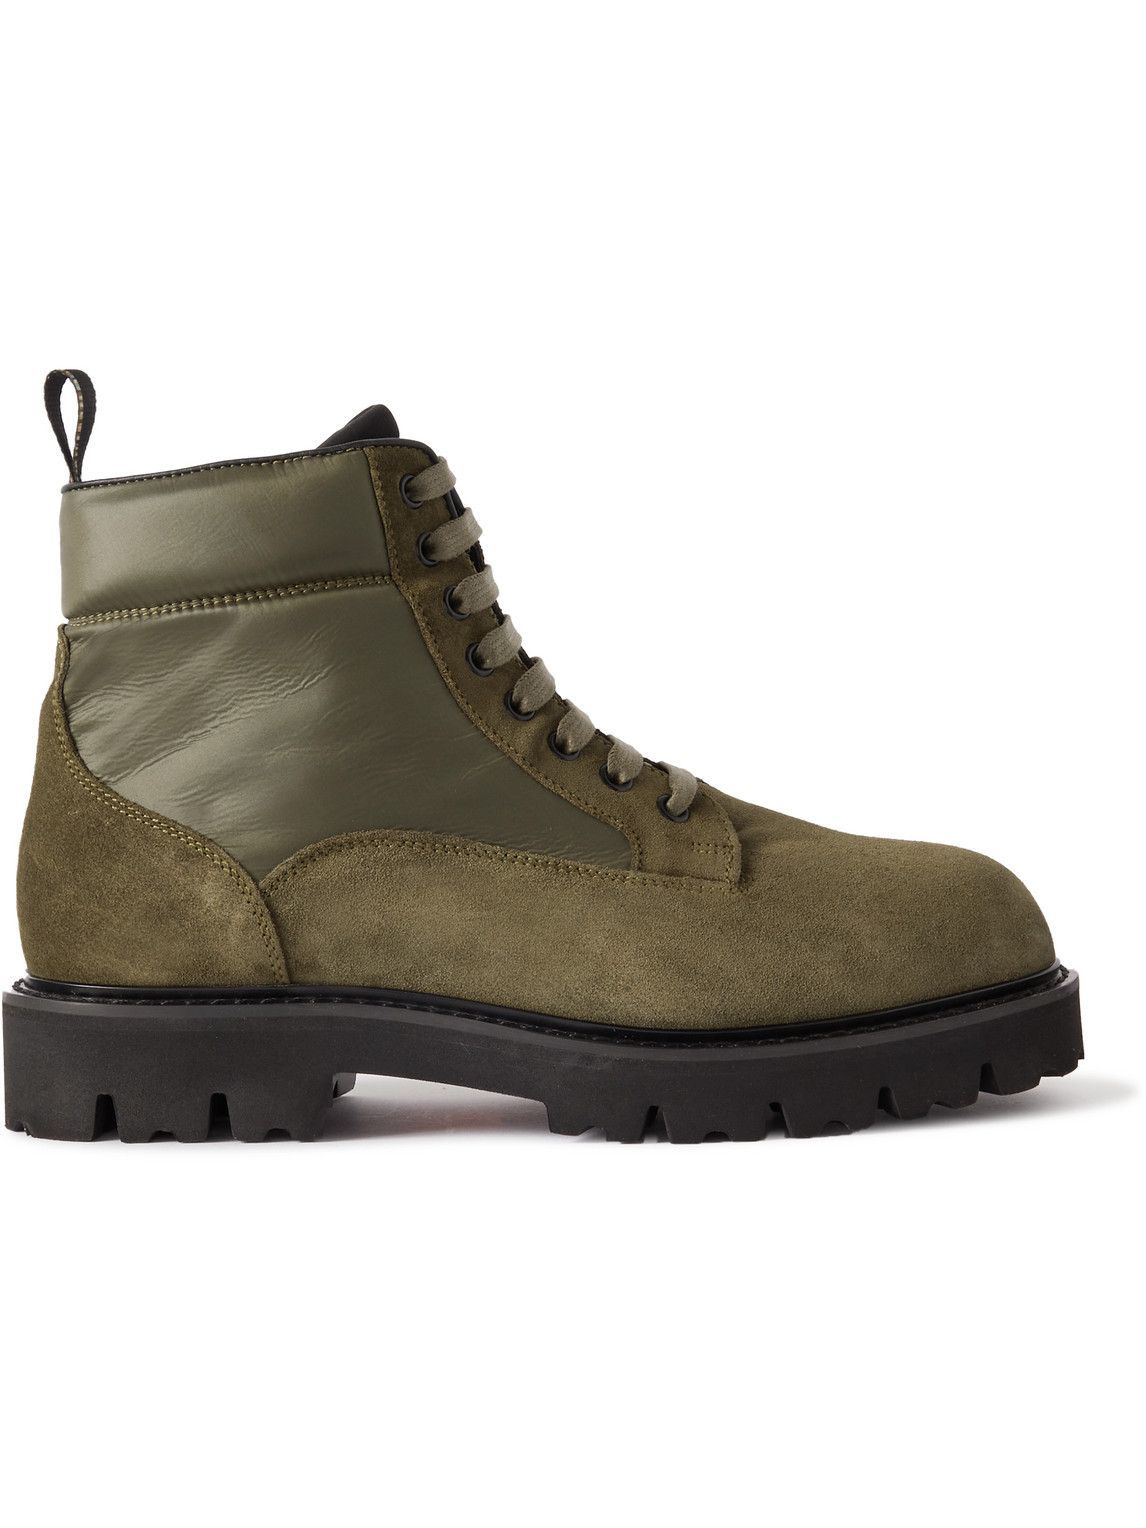 Paul Smith - Dizzie Suede and Nylon Boots - Green Paul Smith